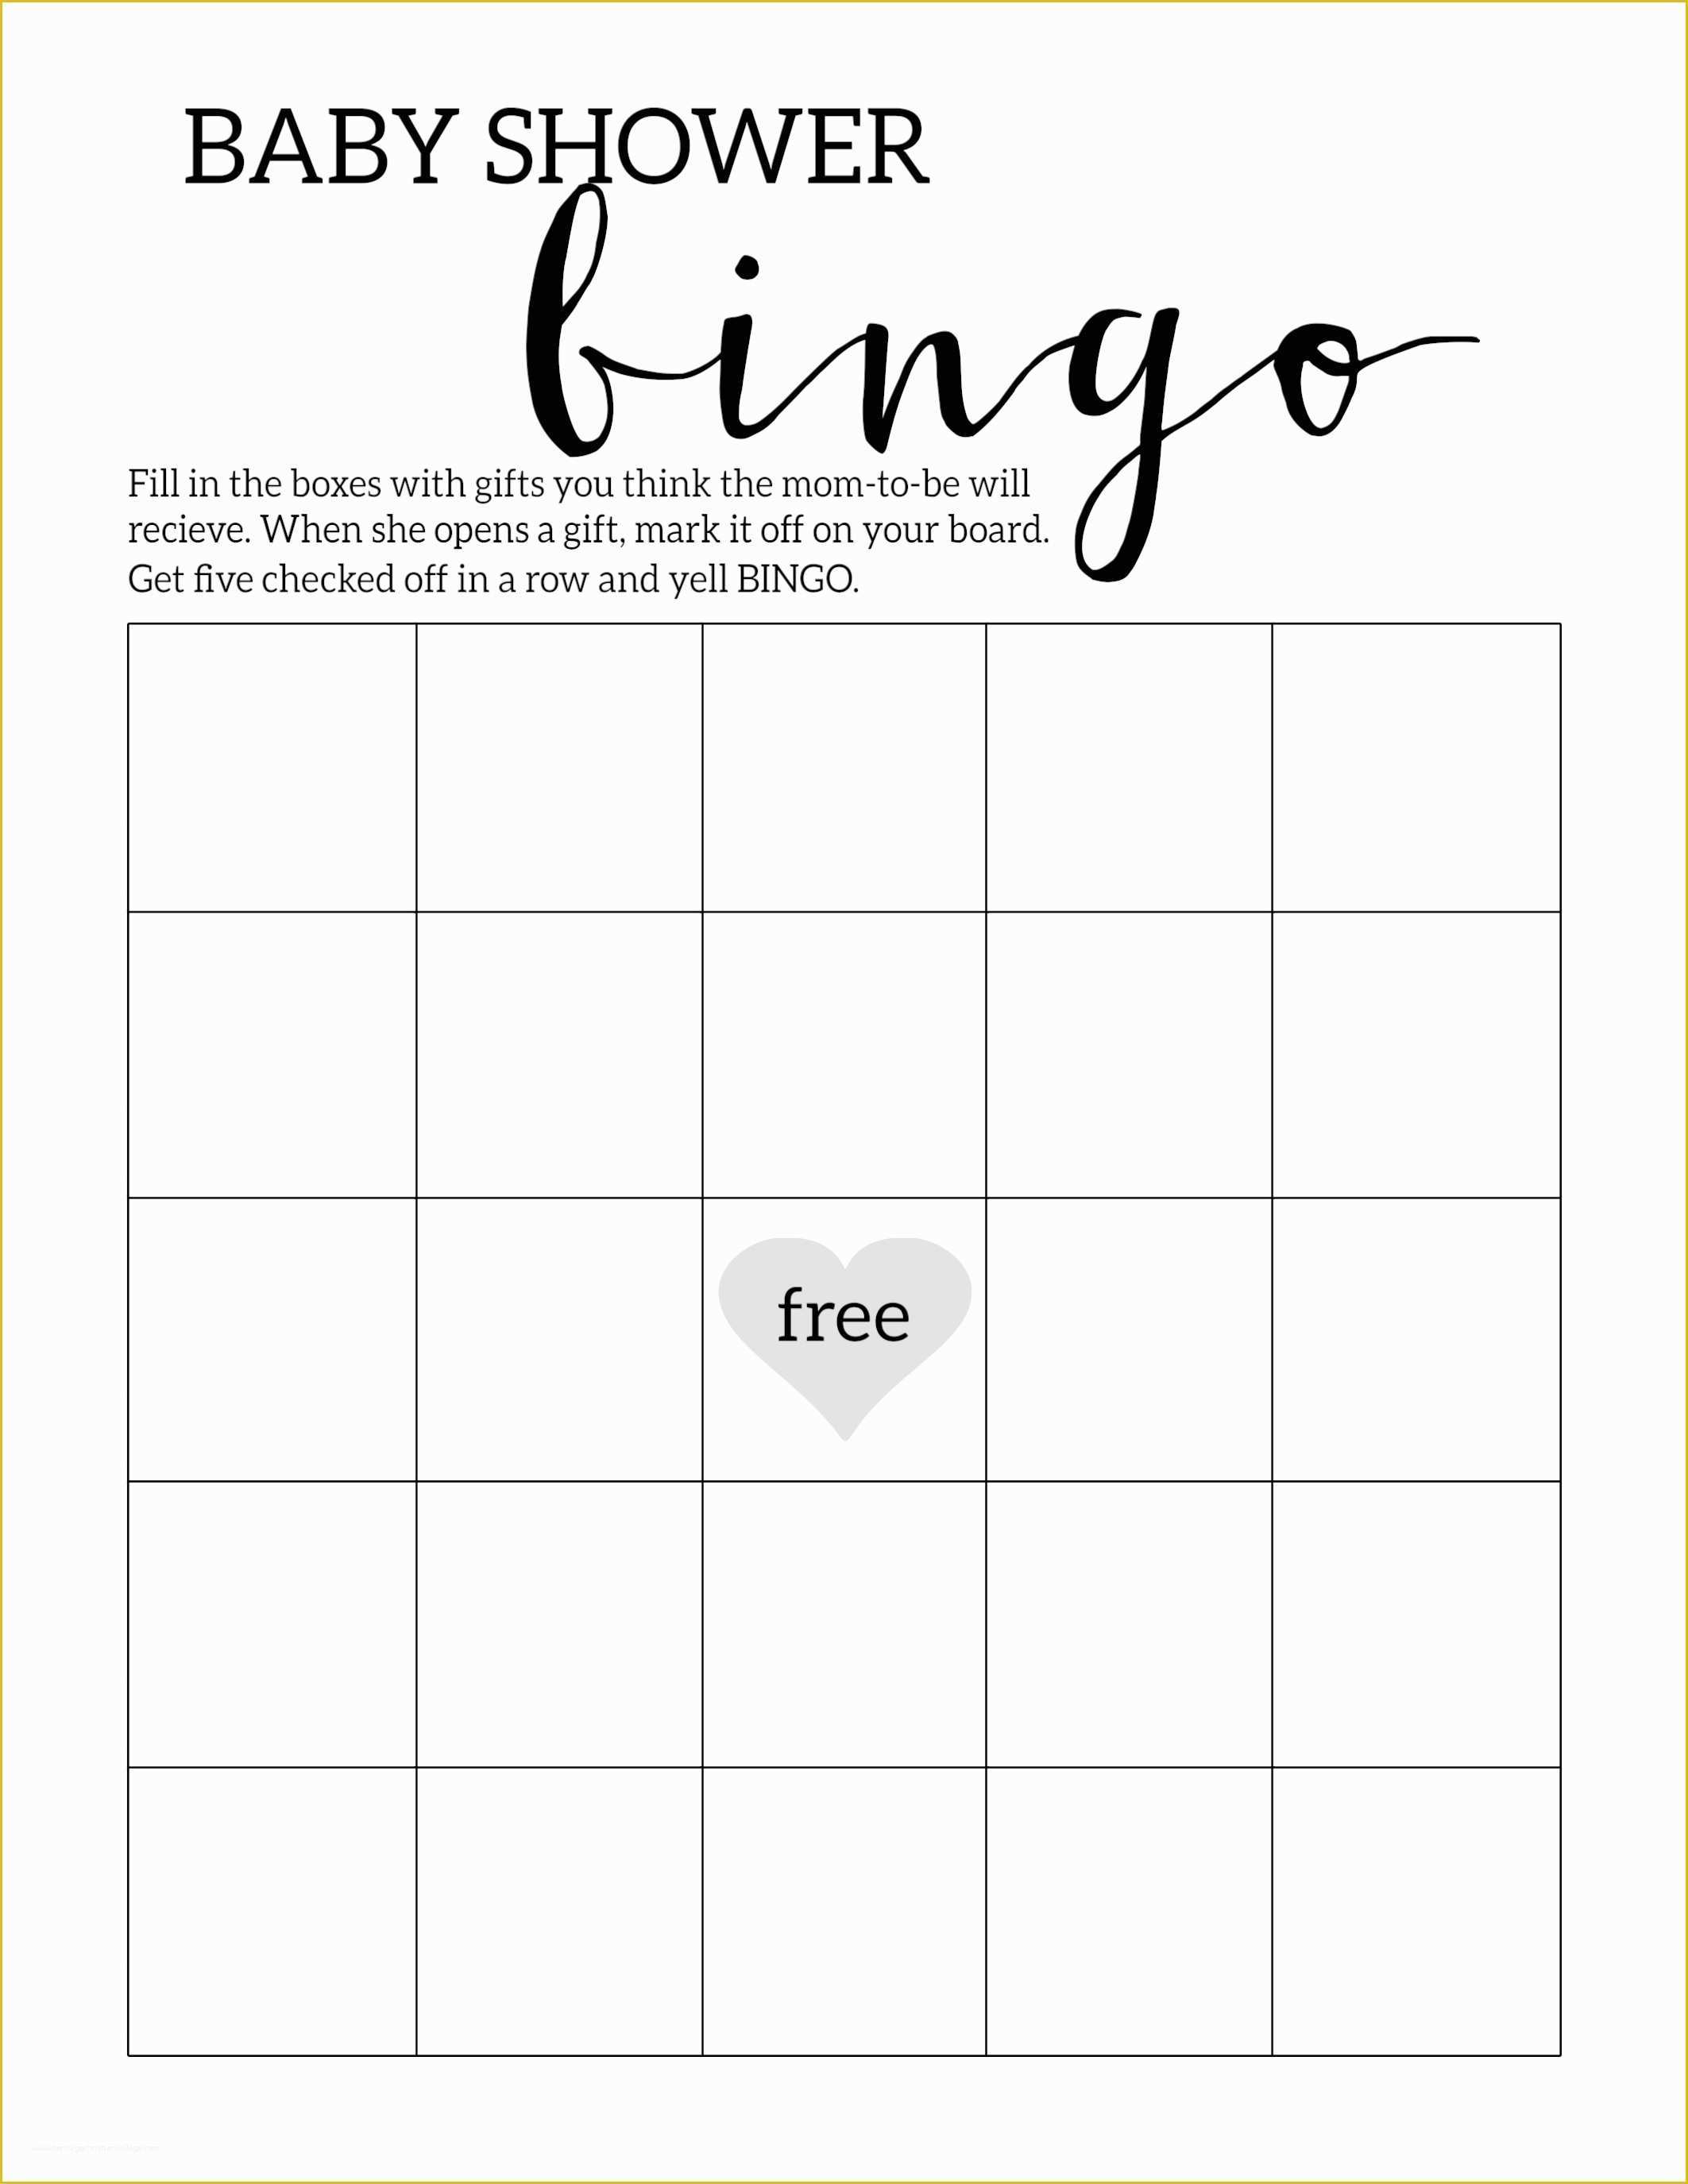 Free Printable Baby Shower Cards Templates Of Baby Shower Bingo Printable Cards Template Paper Trail